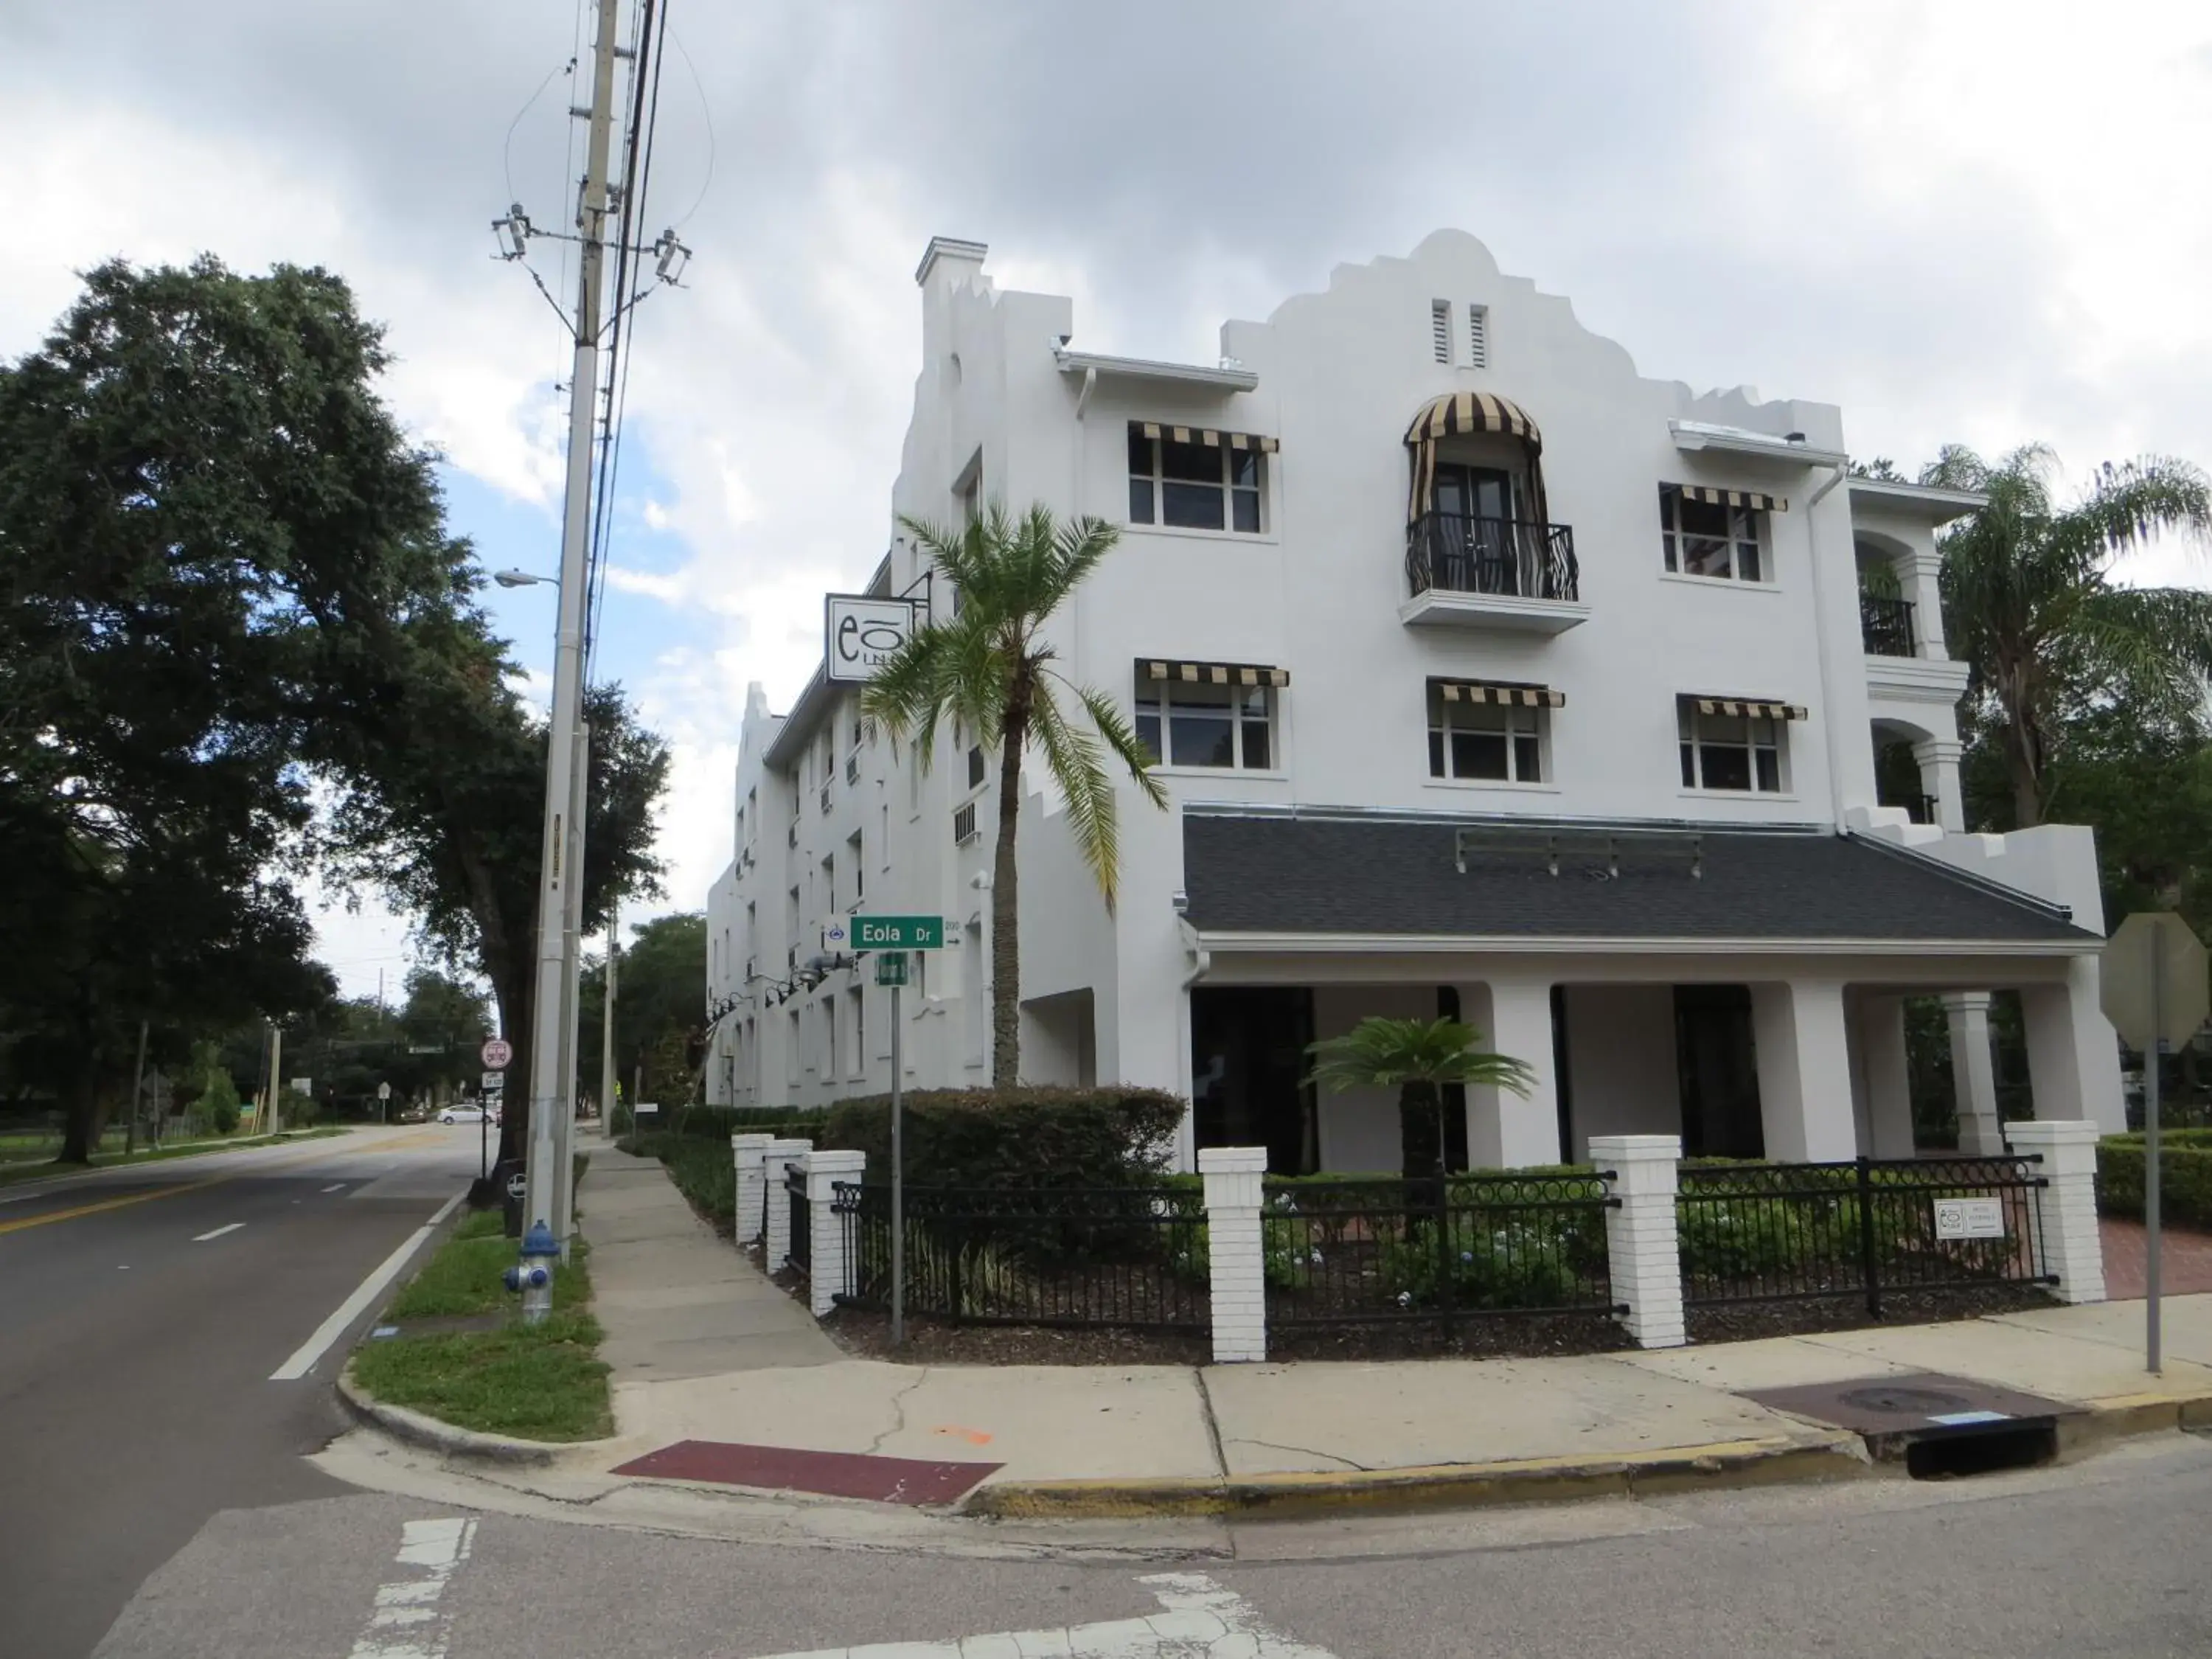 Property Building in Eo Inn - Downtown Orlando